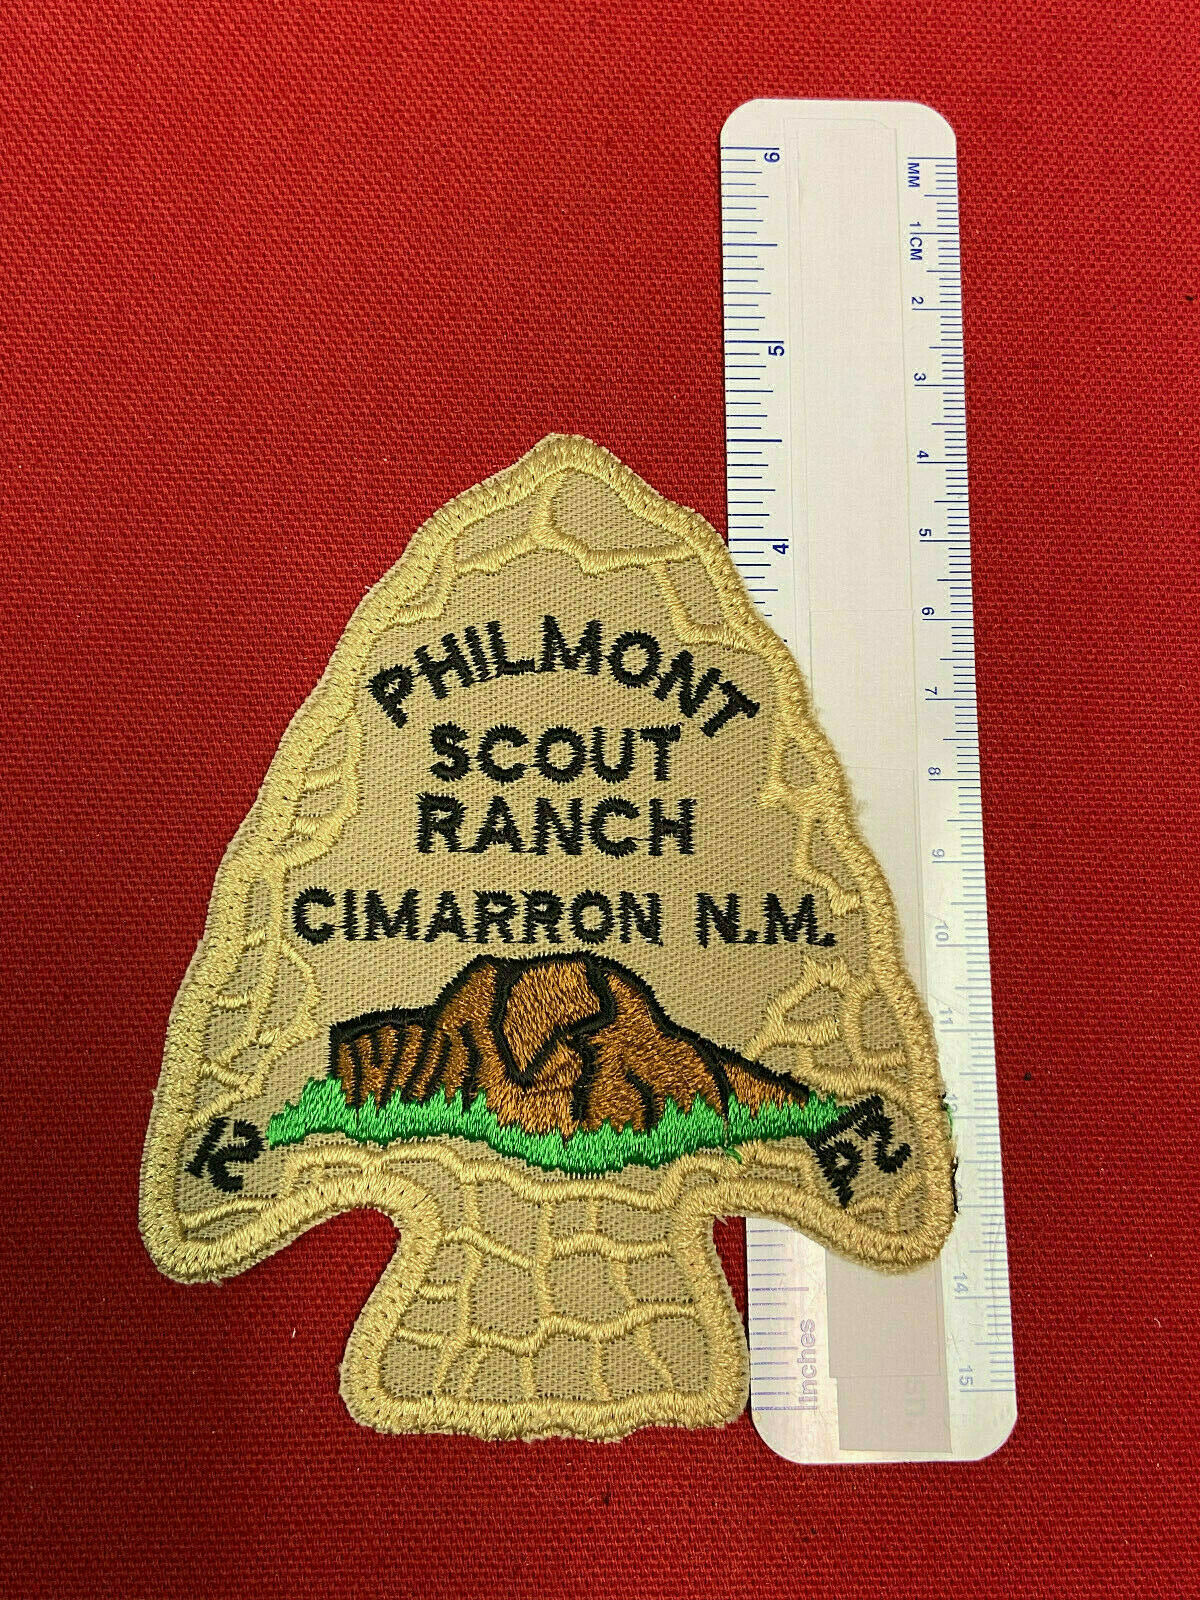 1990s Philmont Scout Ranch Trading Post Oversized Arrowhead Patch [gt1502]